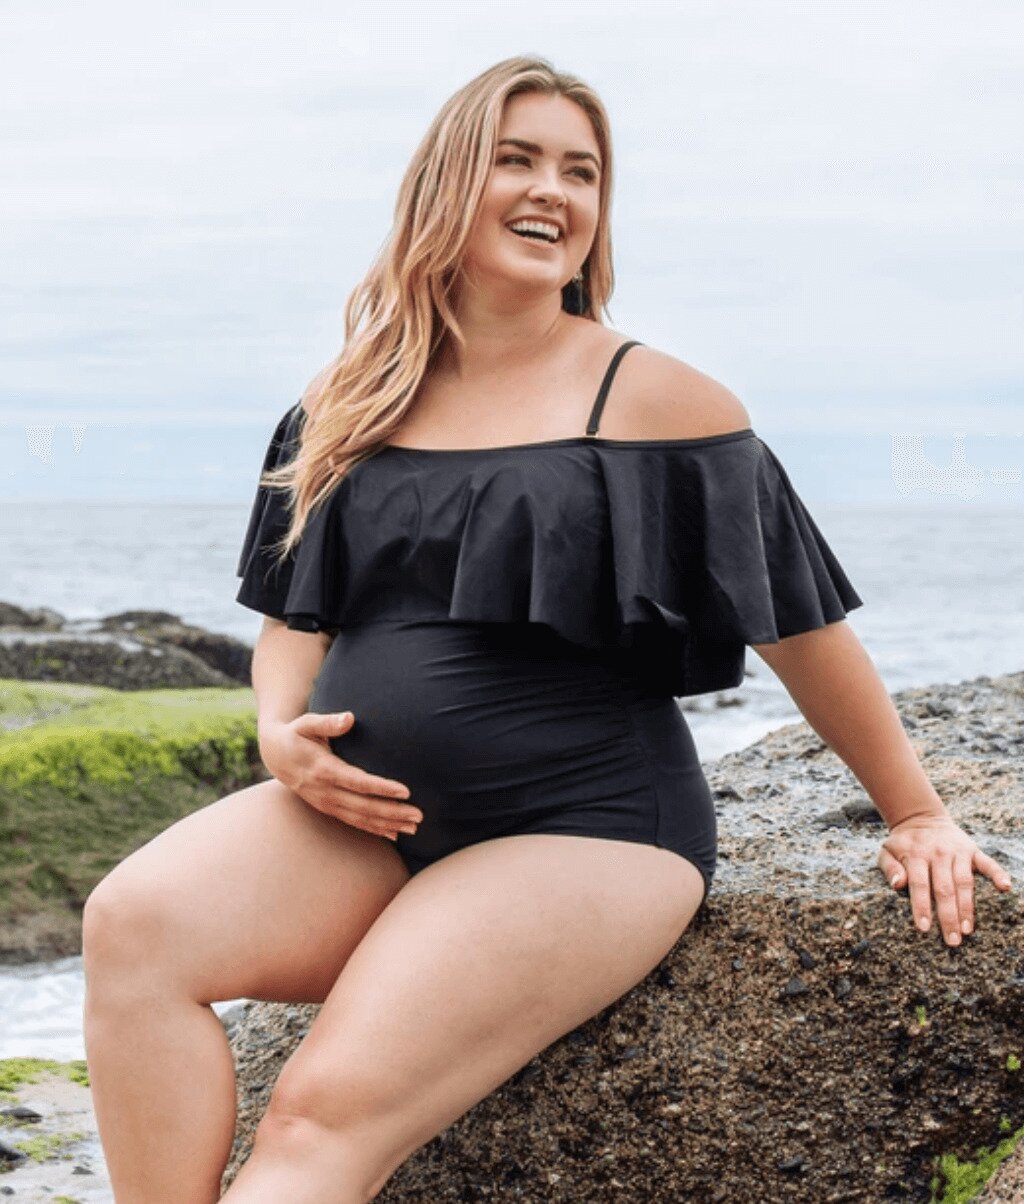 Bump in the Sun: The Best Maternity Bathing Suits for Your Pregnancy